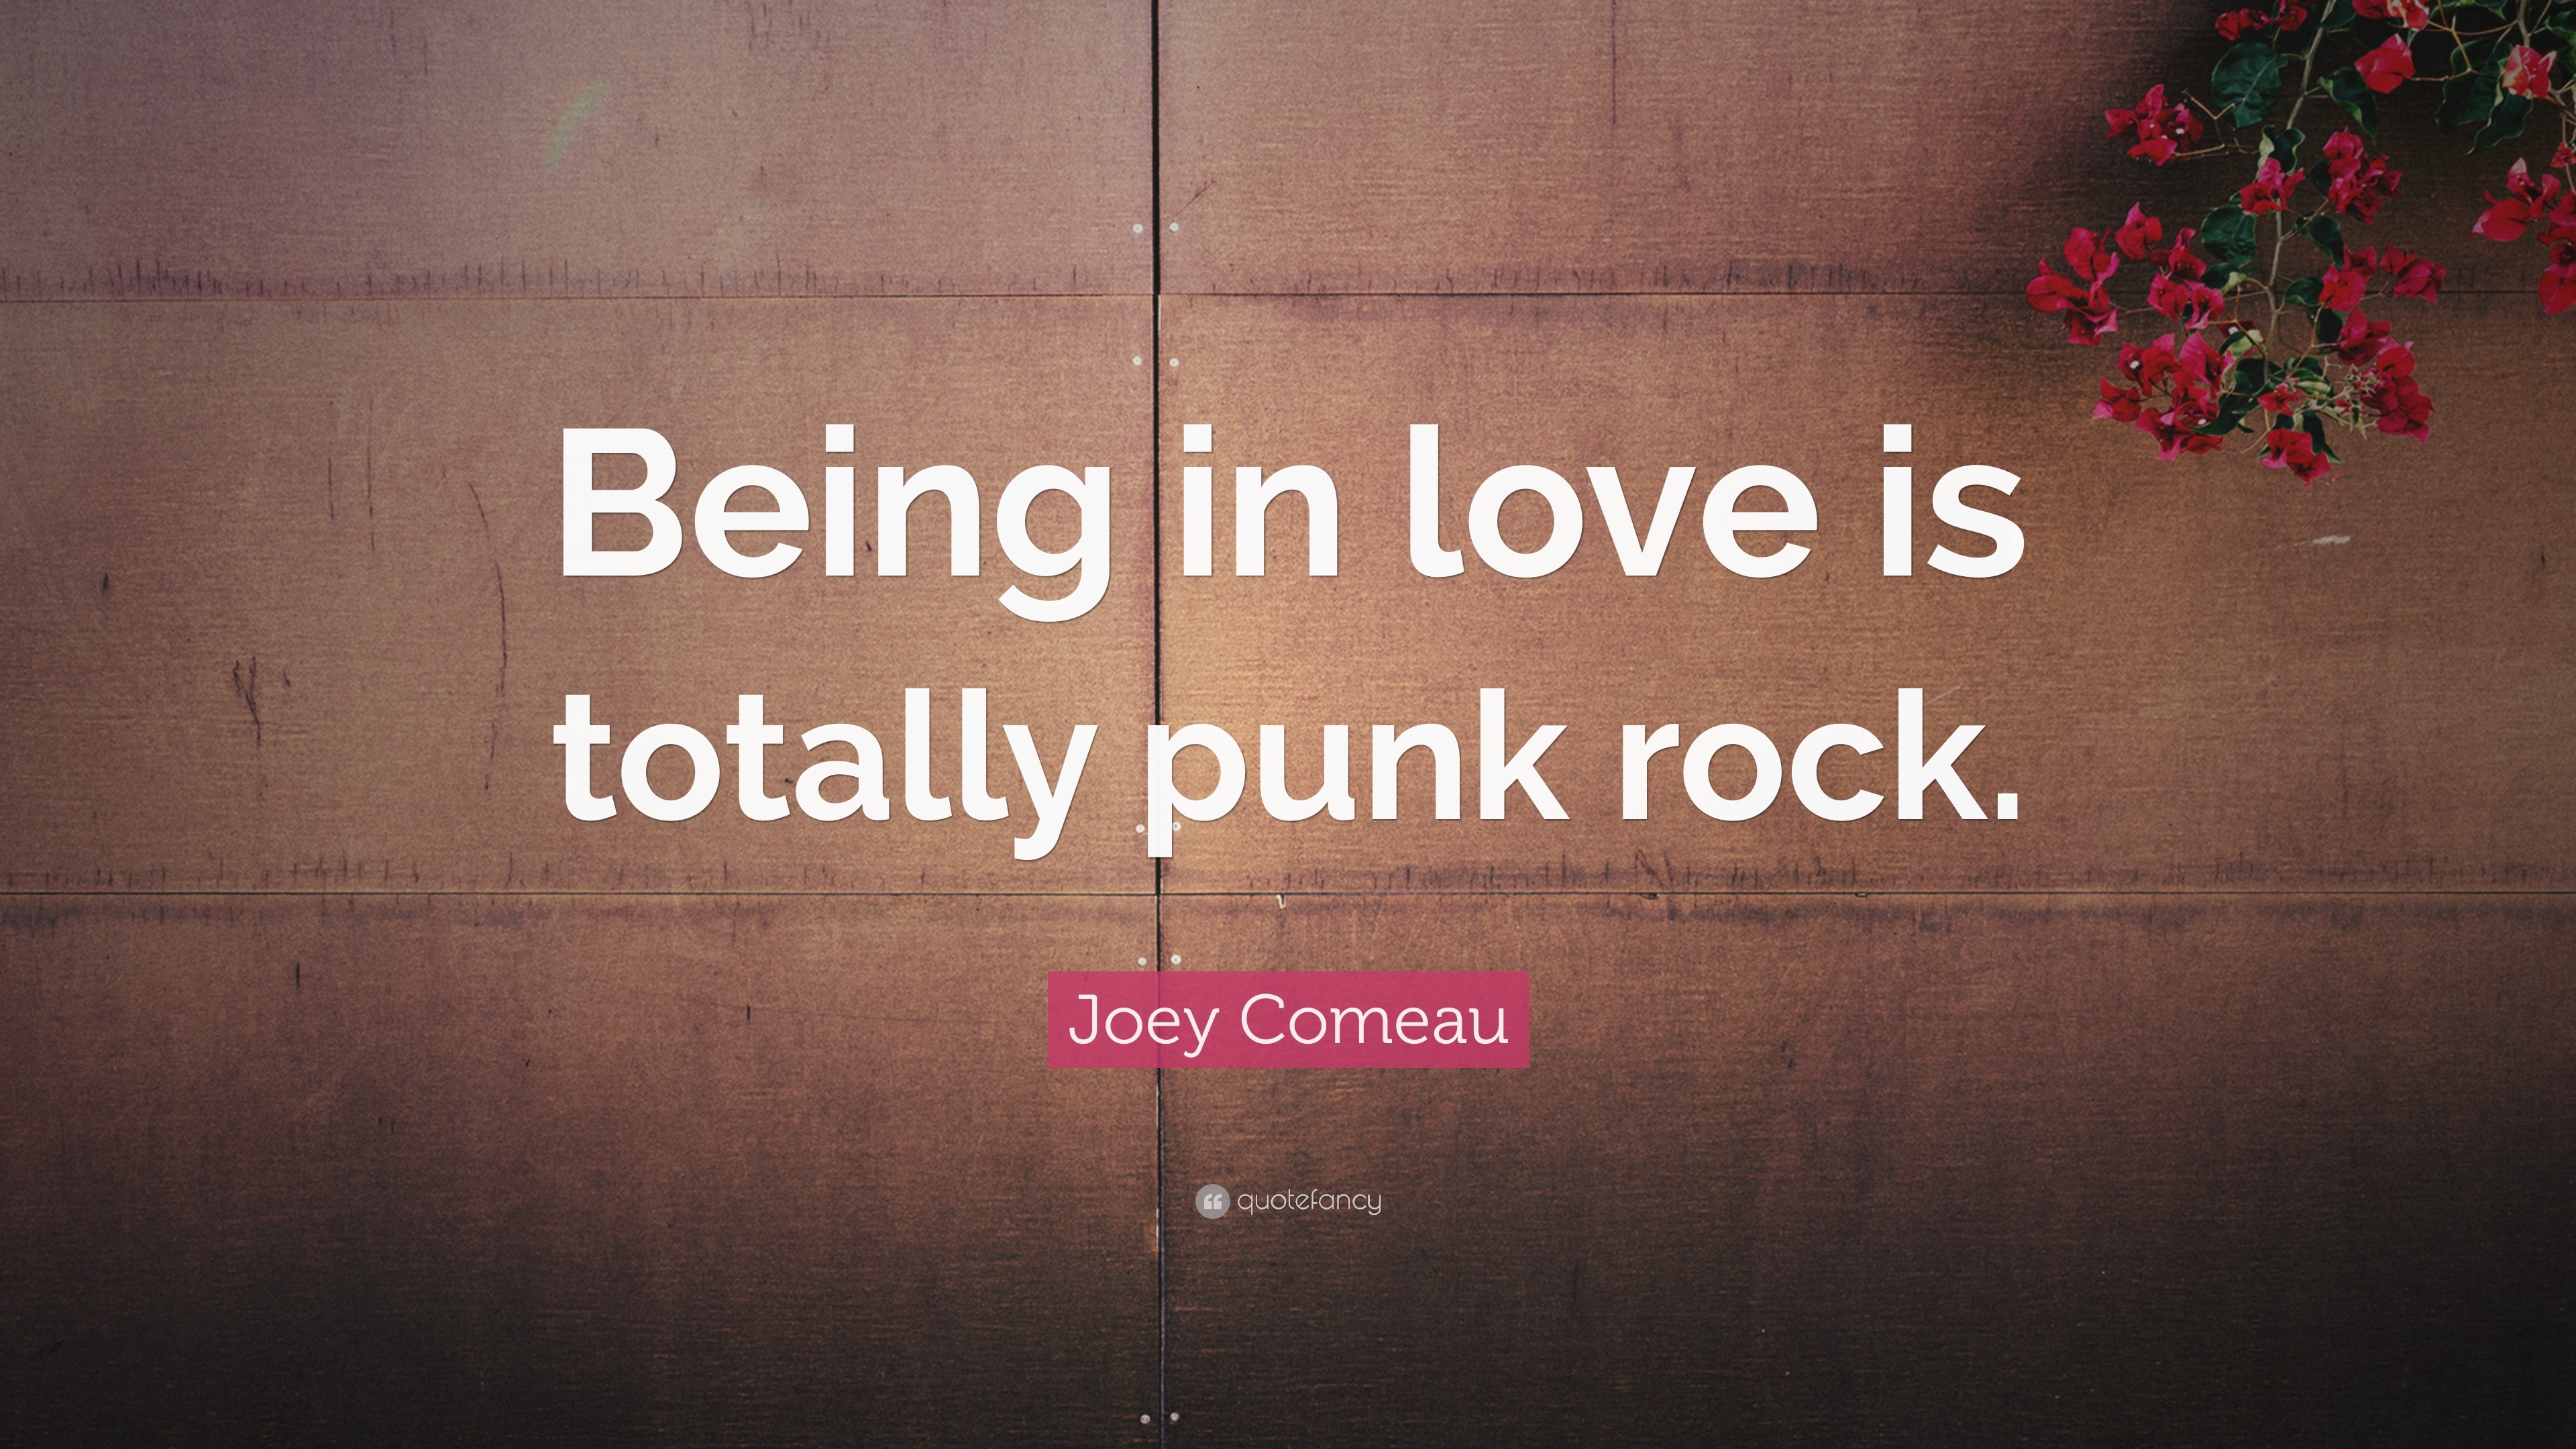 3840x2160 Joey Comeau Quote: “Being in love is totally punk rock.”